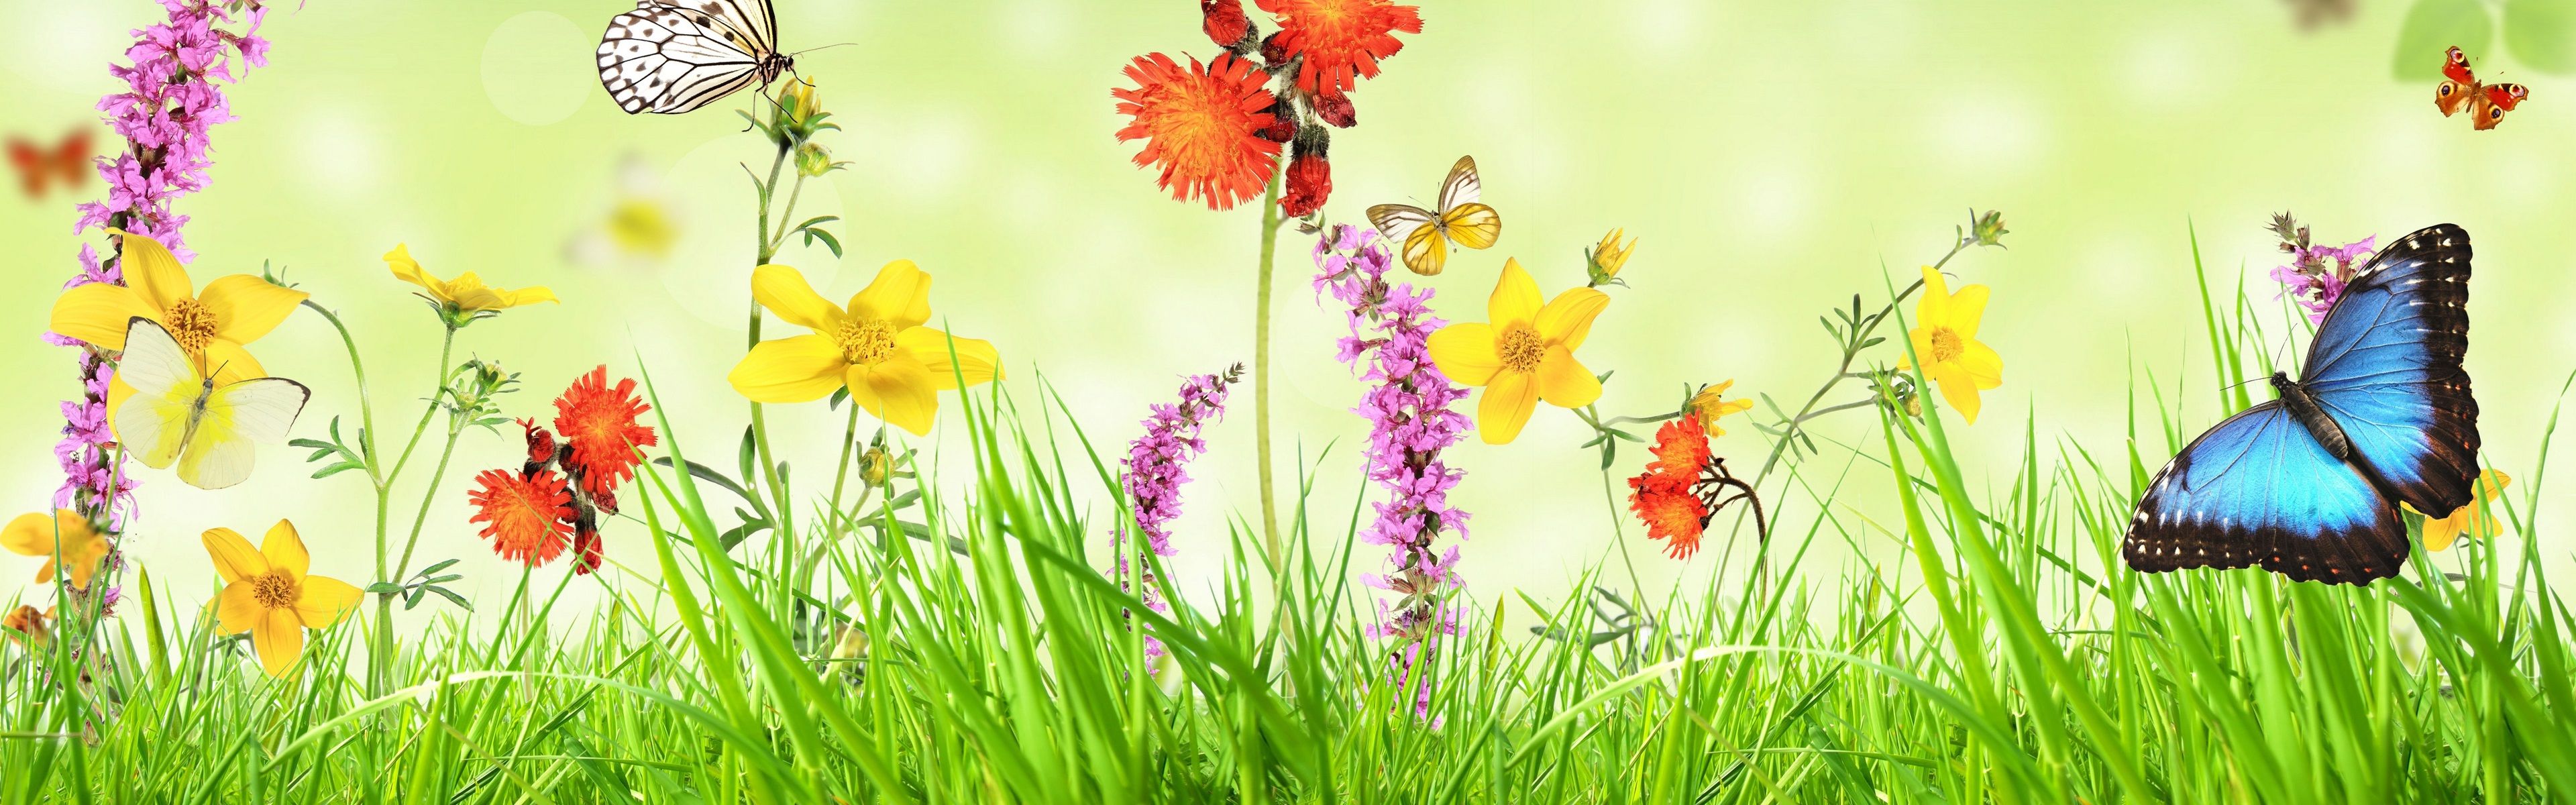 Spring, flowers, grass, butterfly, green background, creative